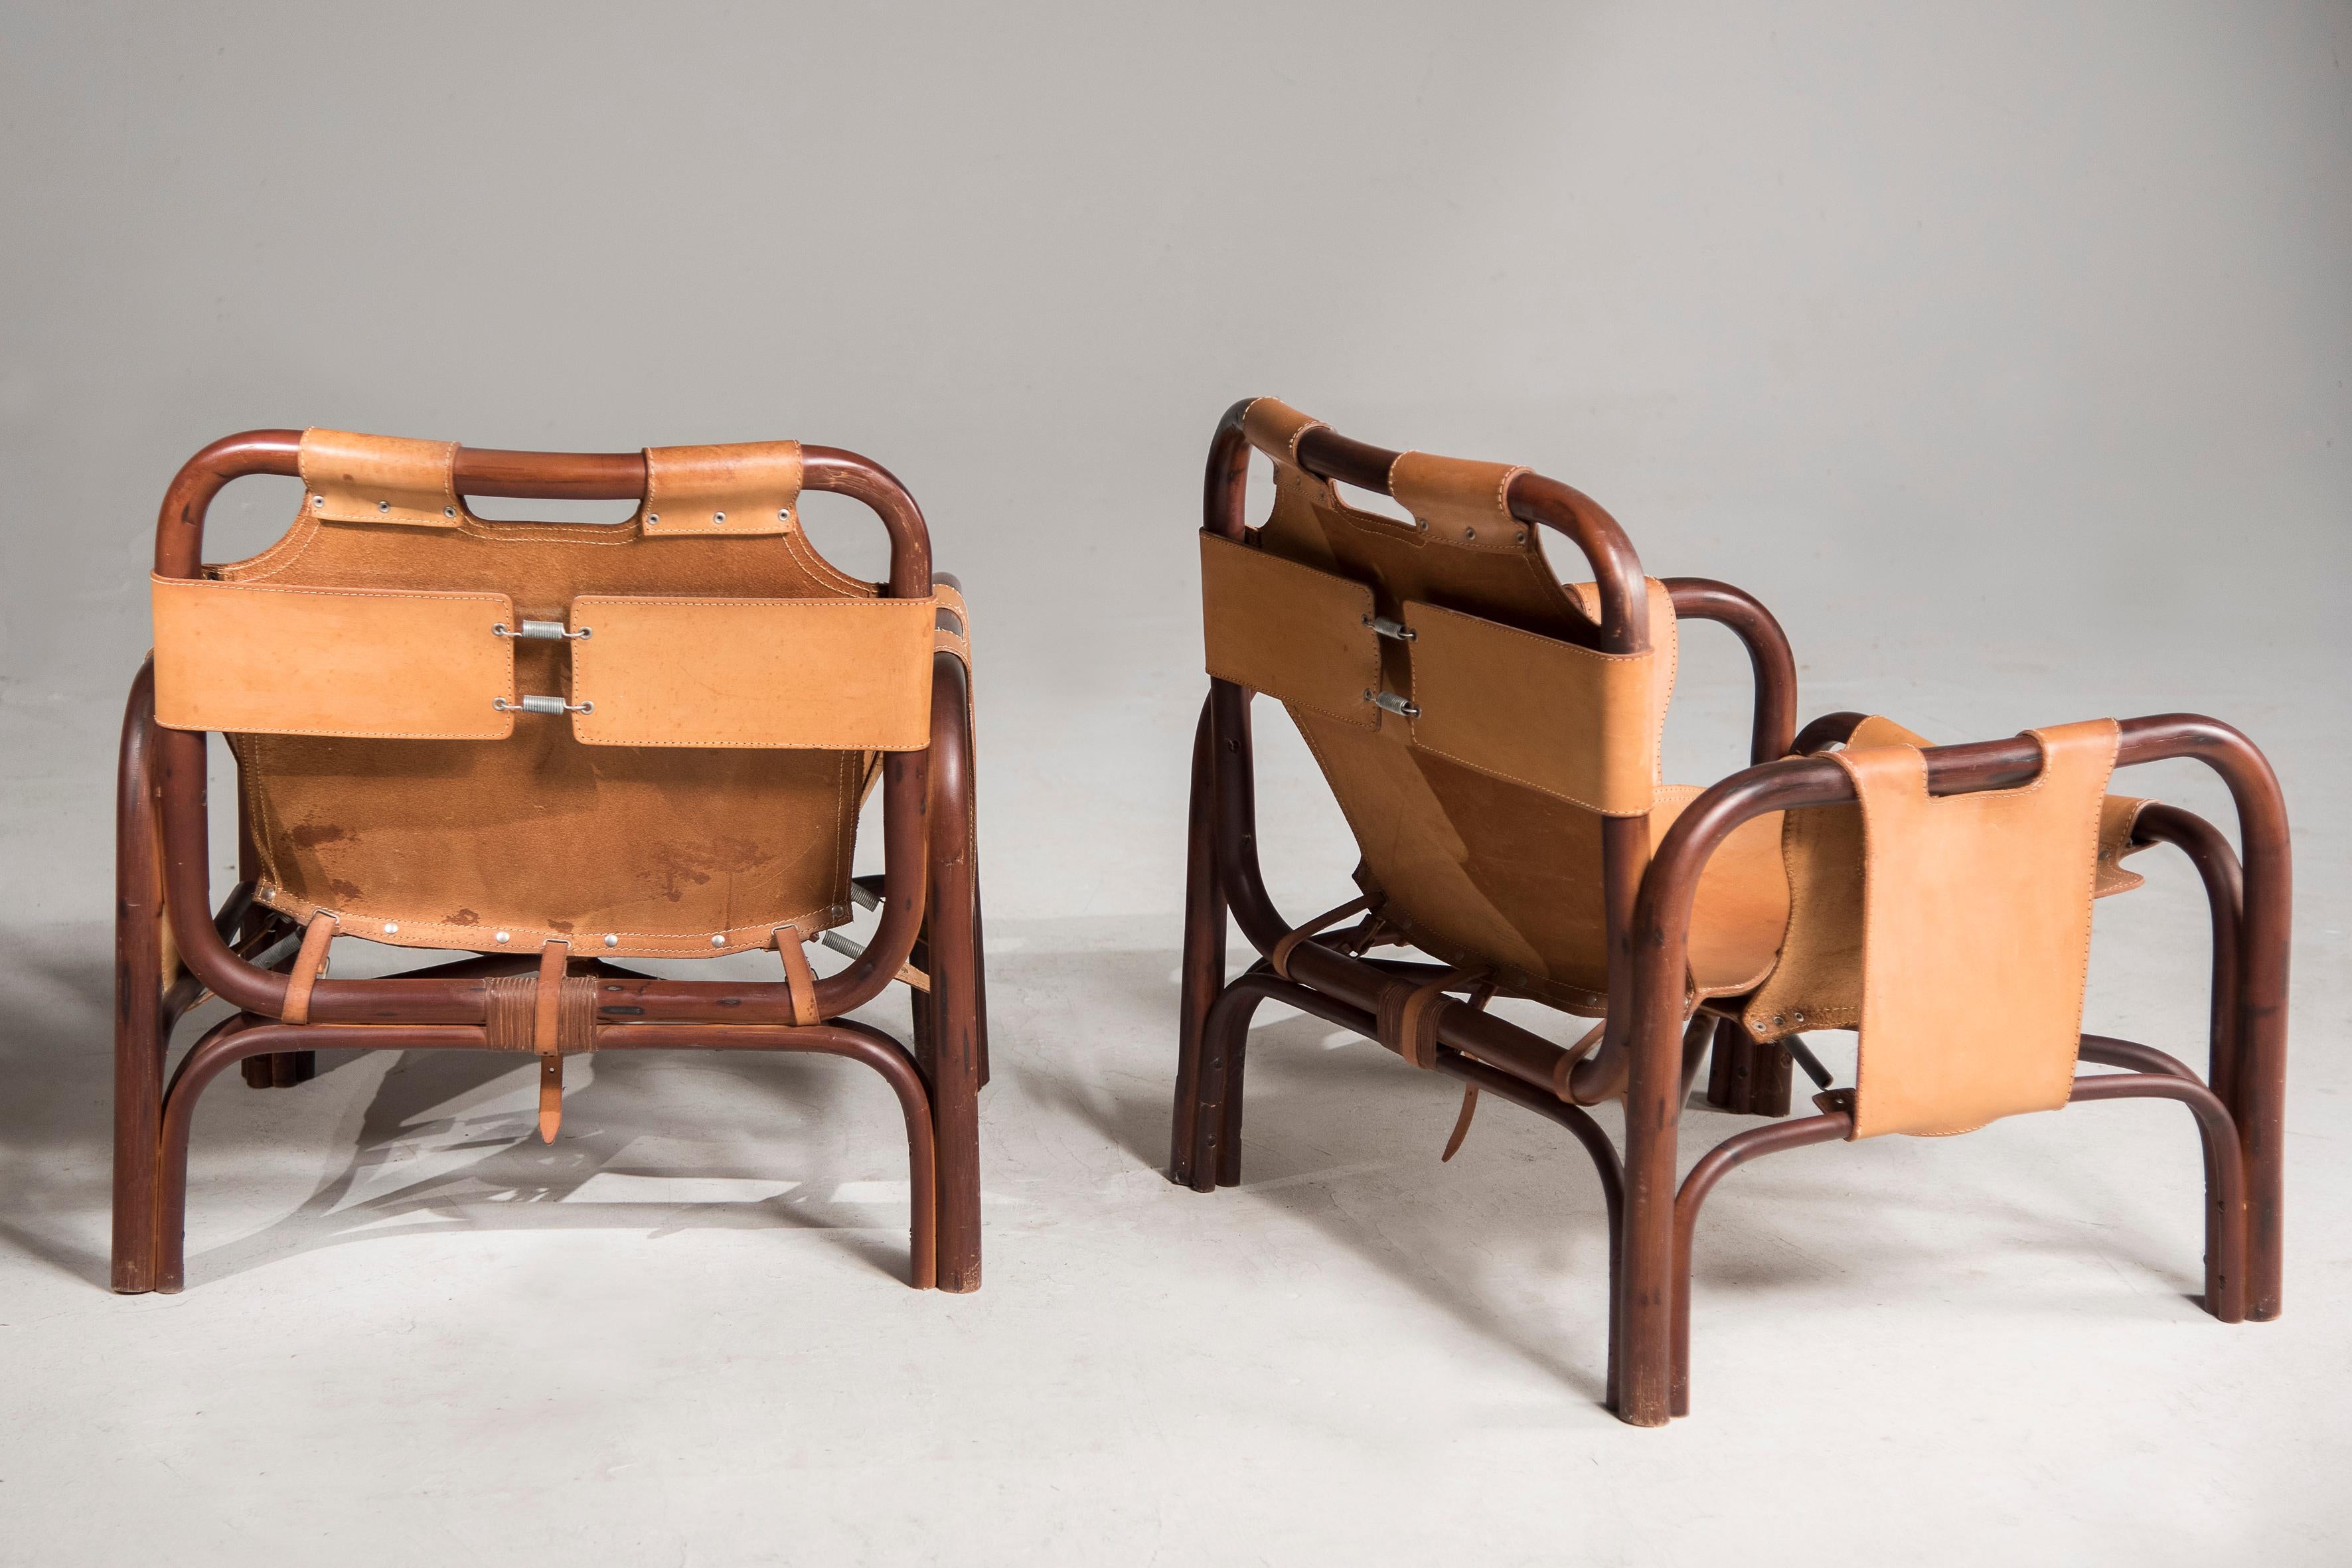 Pair of Safari model armchairs by Tito Agnoli from the 1970s
Leather
Conservatively restored - there are stains on the leather
Price Euro 4800 pair
Measures 67x63 x71 cm.
 